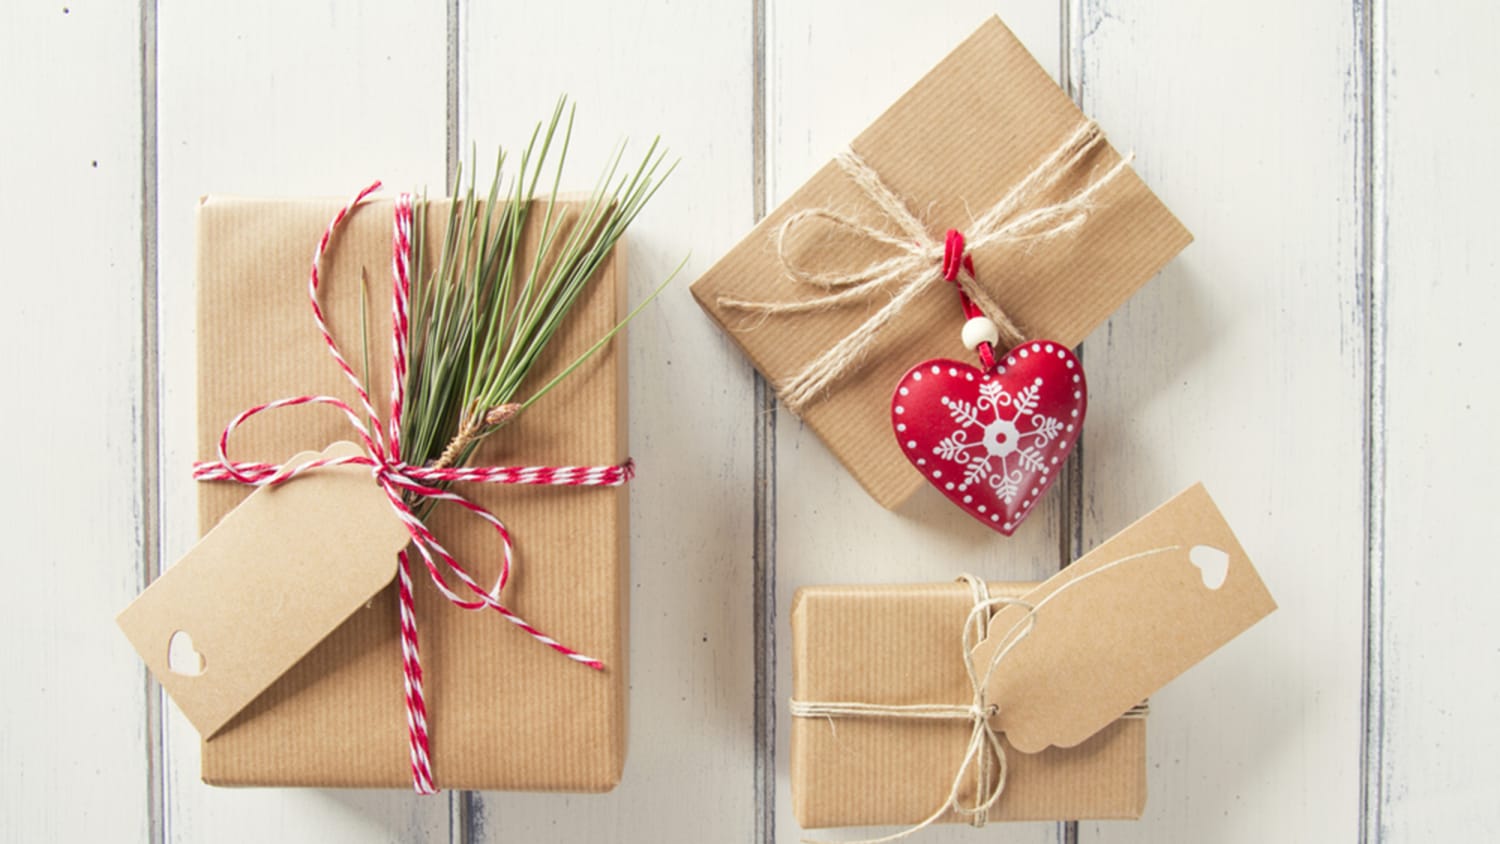 Holiday Gift Guide: 20 Gifts for Under $20